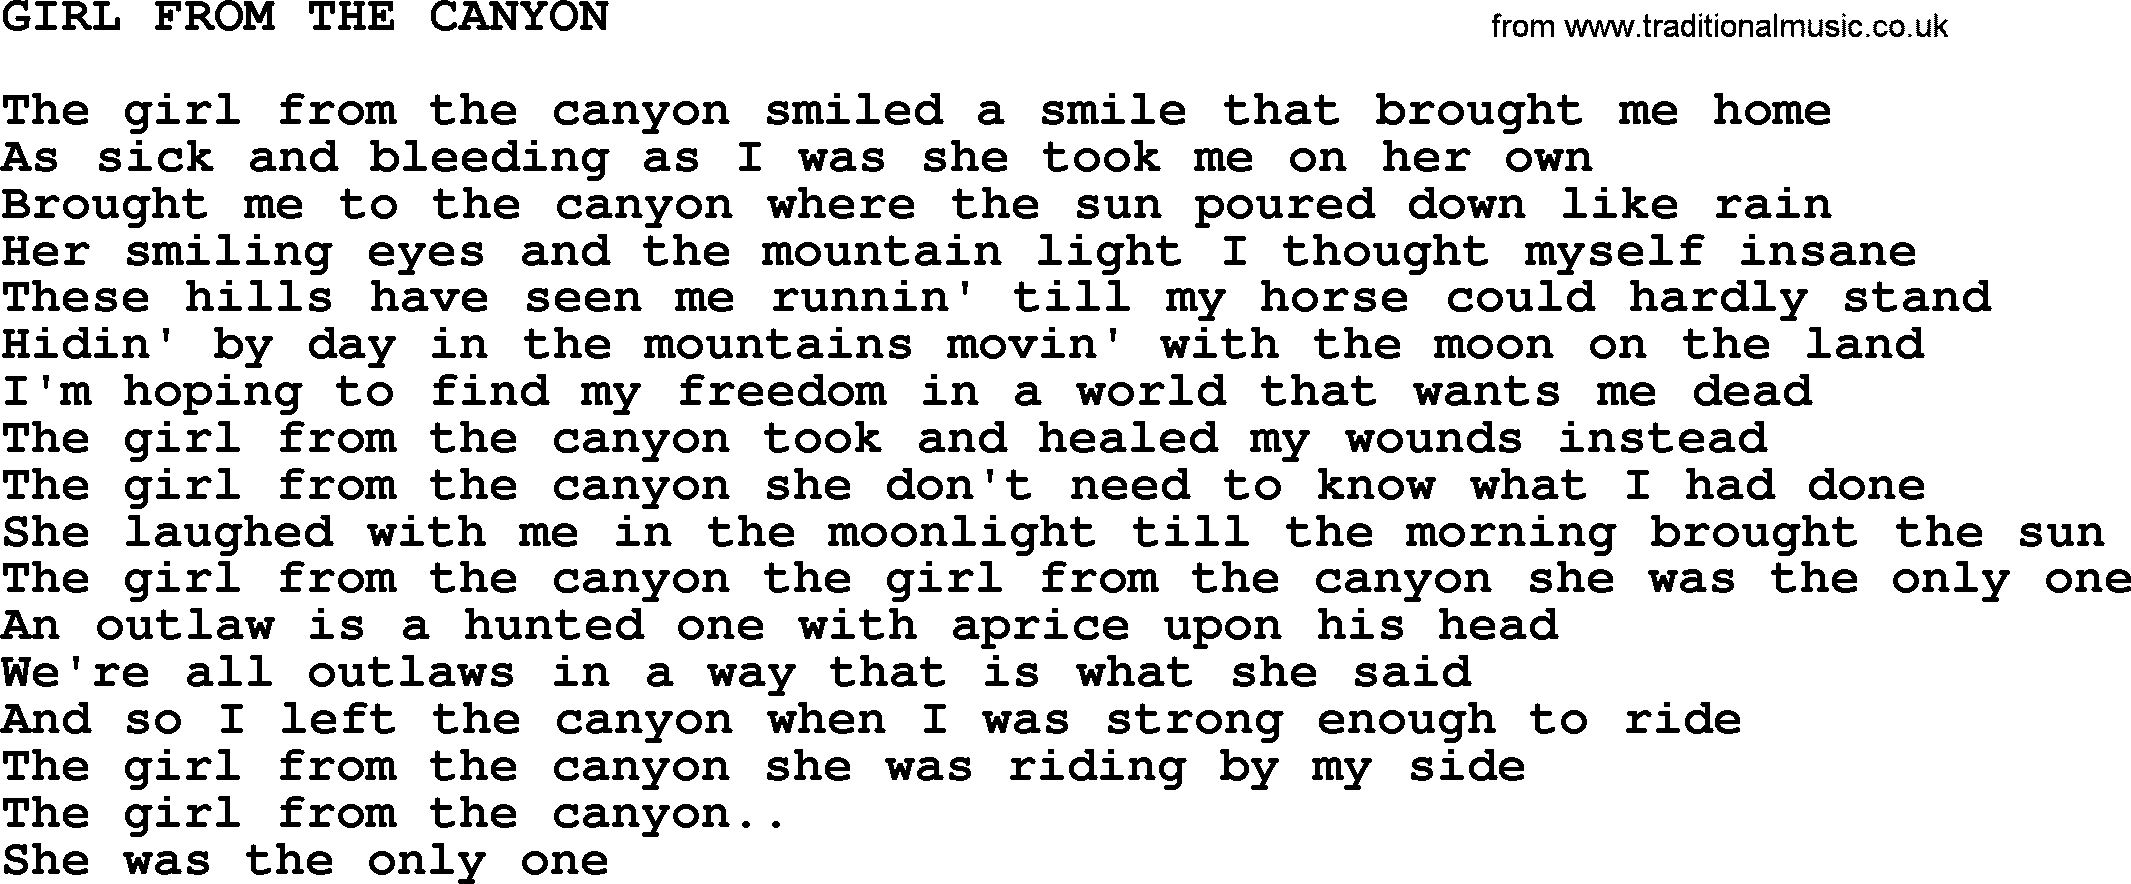 Johnny Cash song Girl From The Canyon.txt lyrics